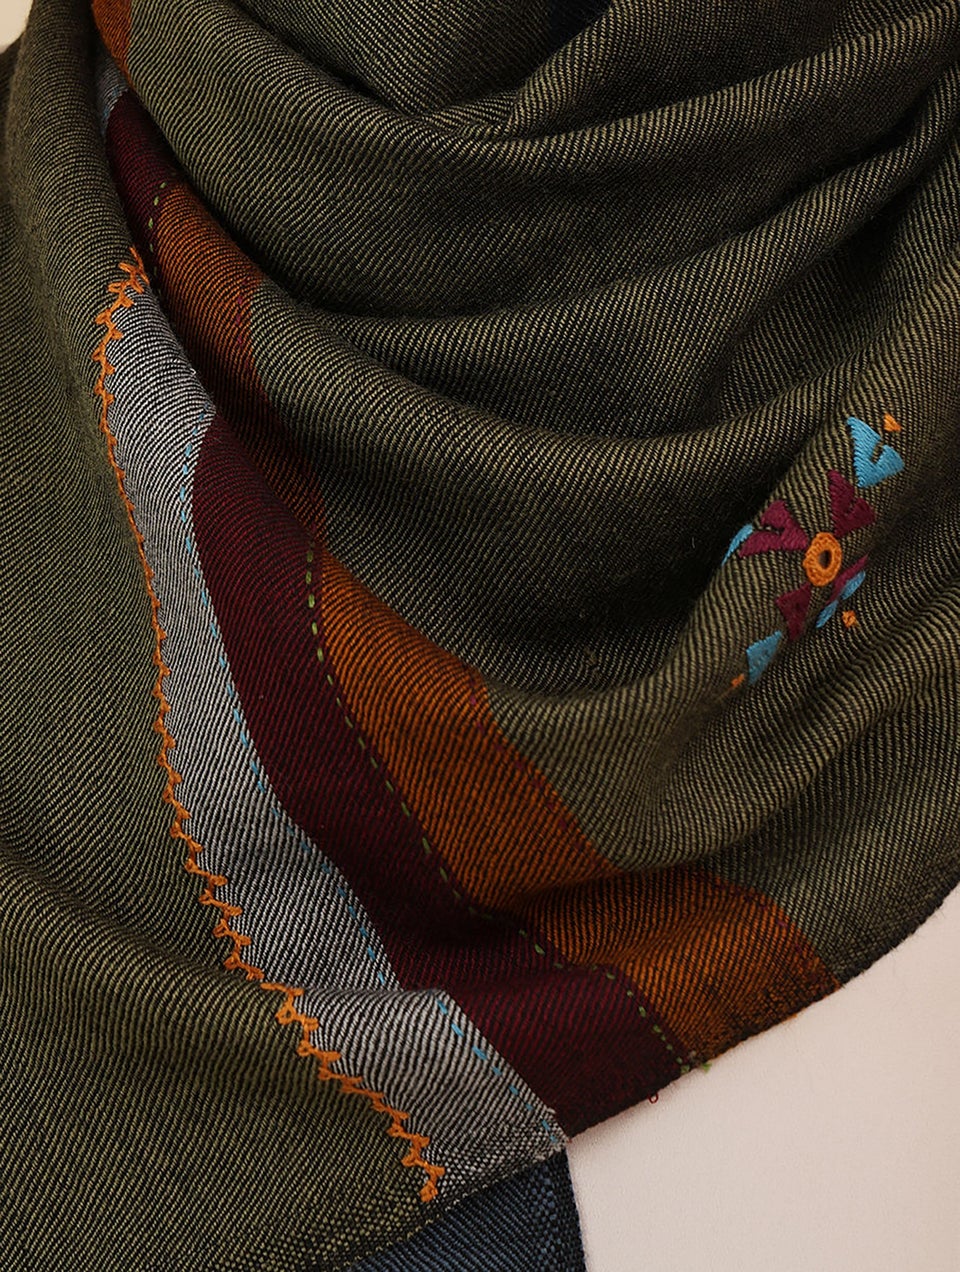 Women Multicolour Handwoven Wool Stole With Soof Embroidery